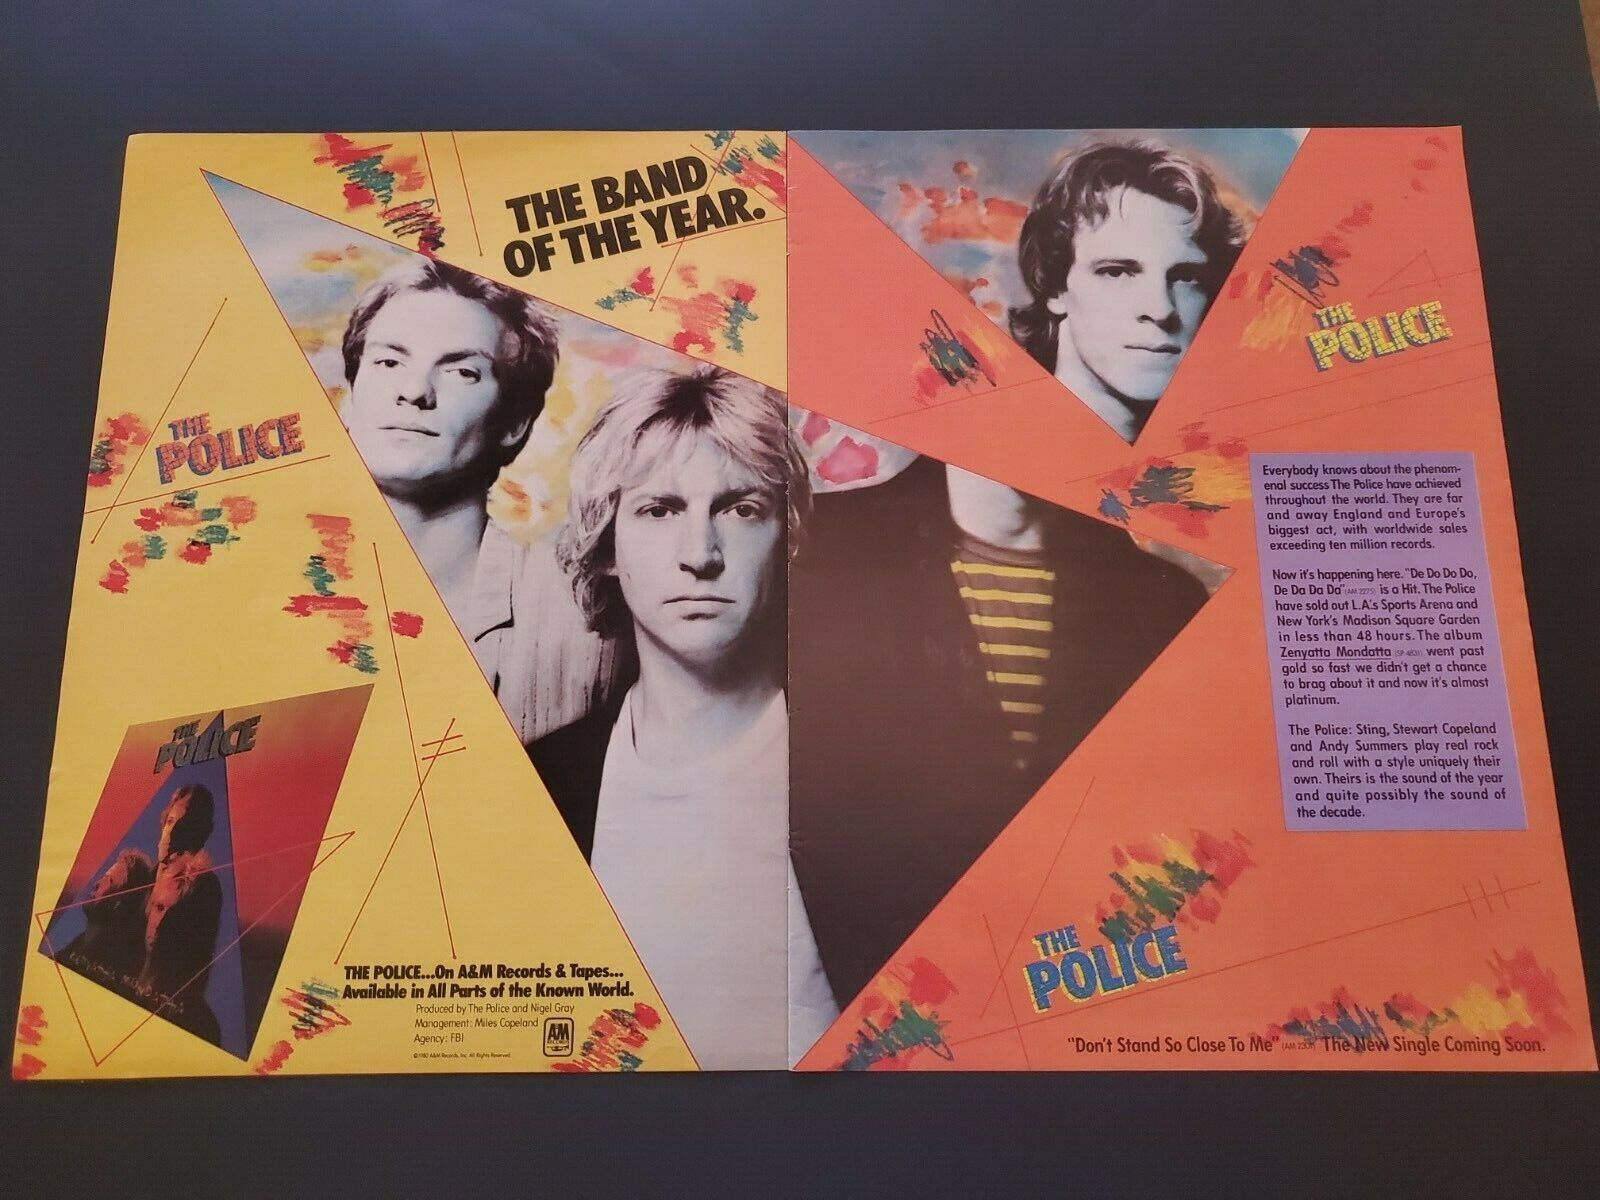 THE POLICE THE BAND OF THE YEAR (1981) LARGE RARE ORIGINAL PRINT